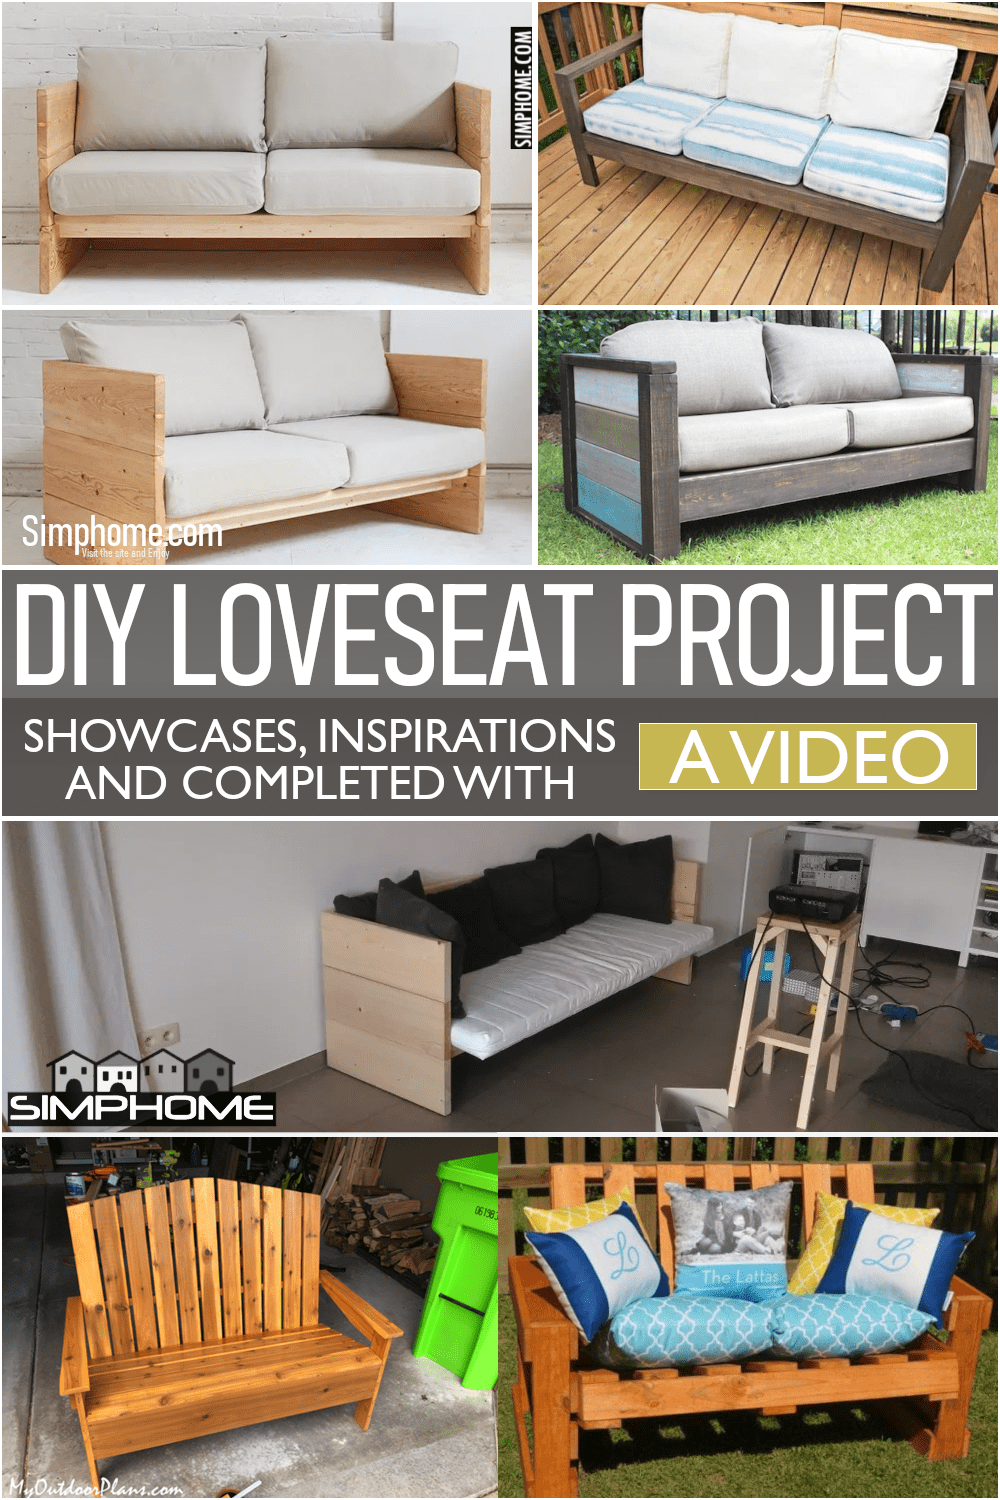 10 Loveseat DIY Projects via Simphome.comFeatured